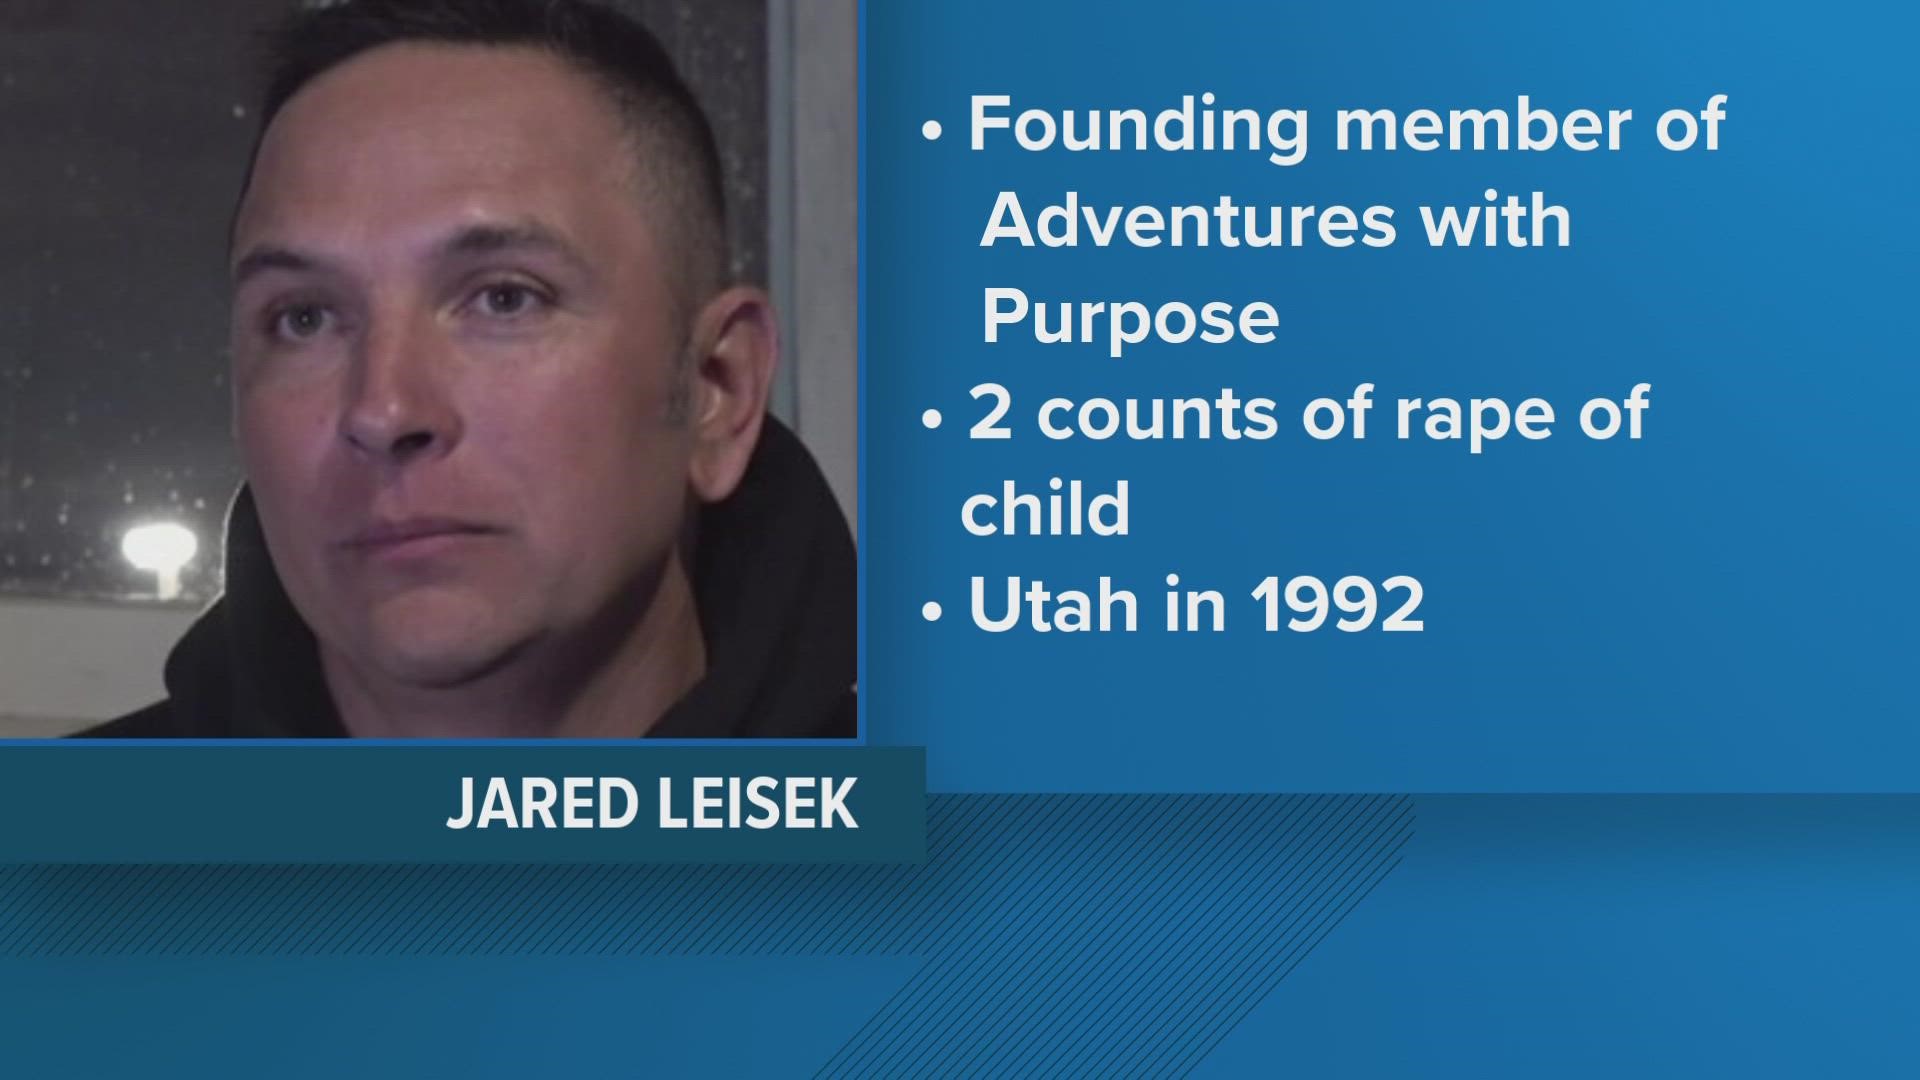 Jared Leisek is a founding member of Adventures with Purpose, the dive team that helped find a Waco woman who had been missing for 4 years.